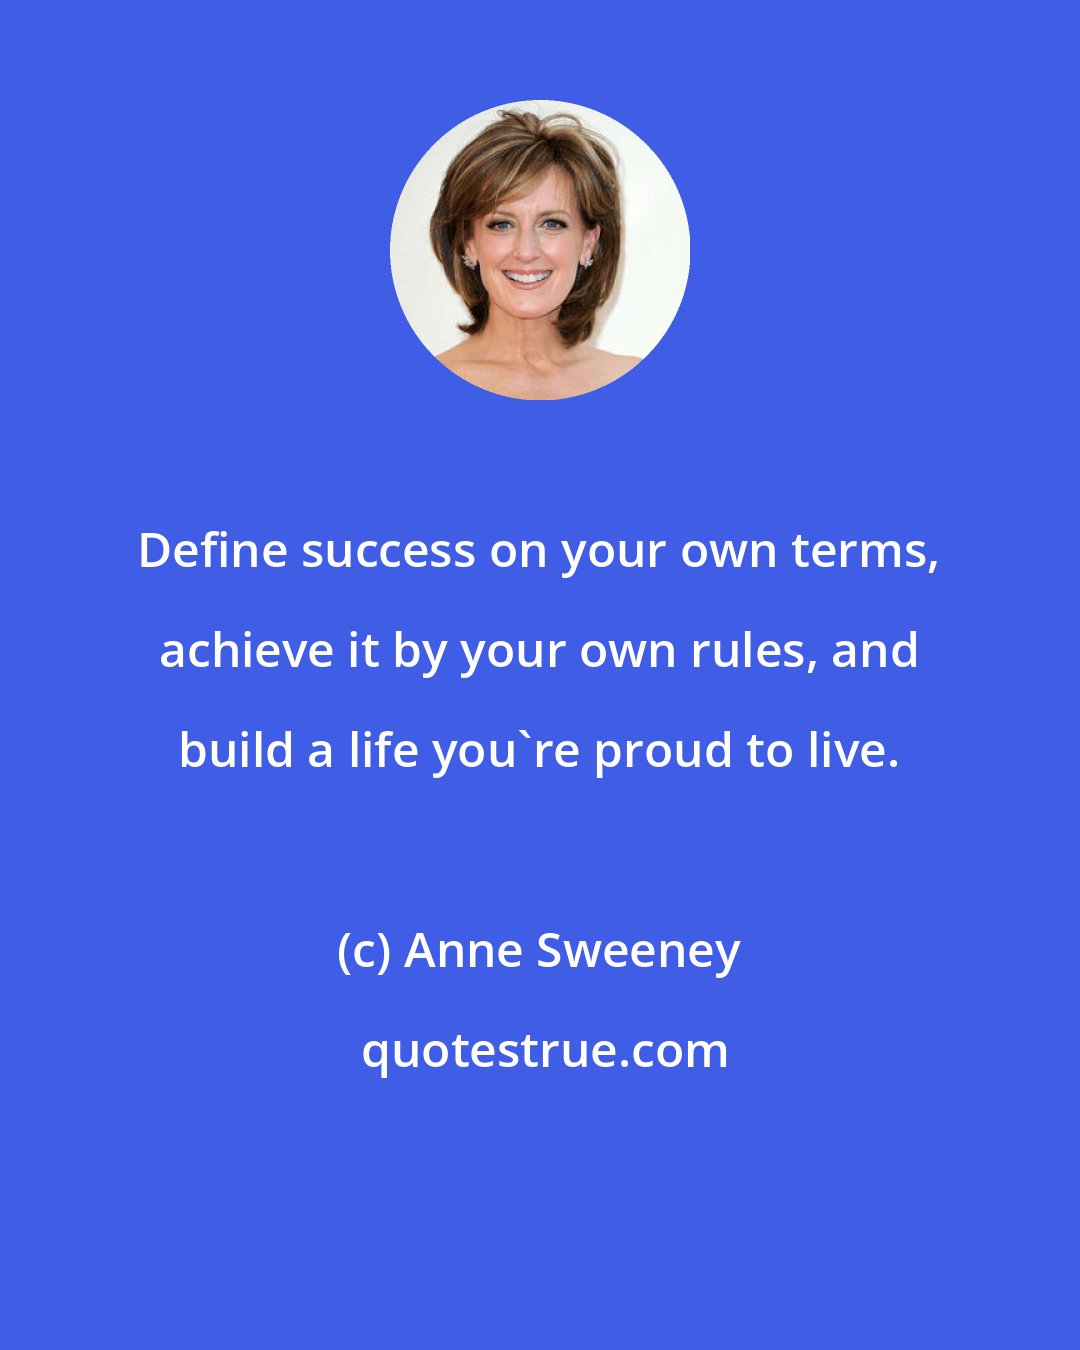 Anne Sweeney: Define success on your own terms, achieve it by your own rules, and build a life you're proud to live.